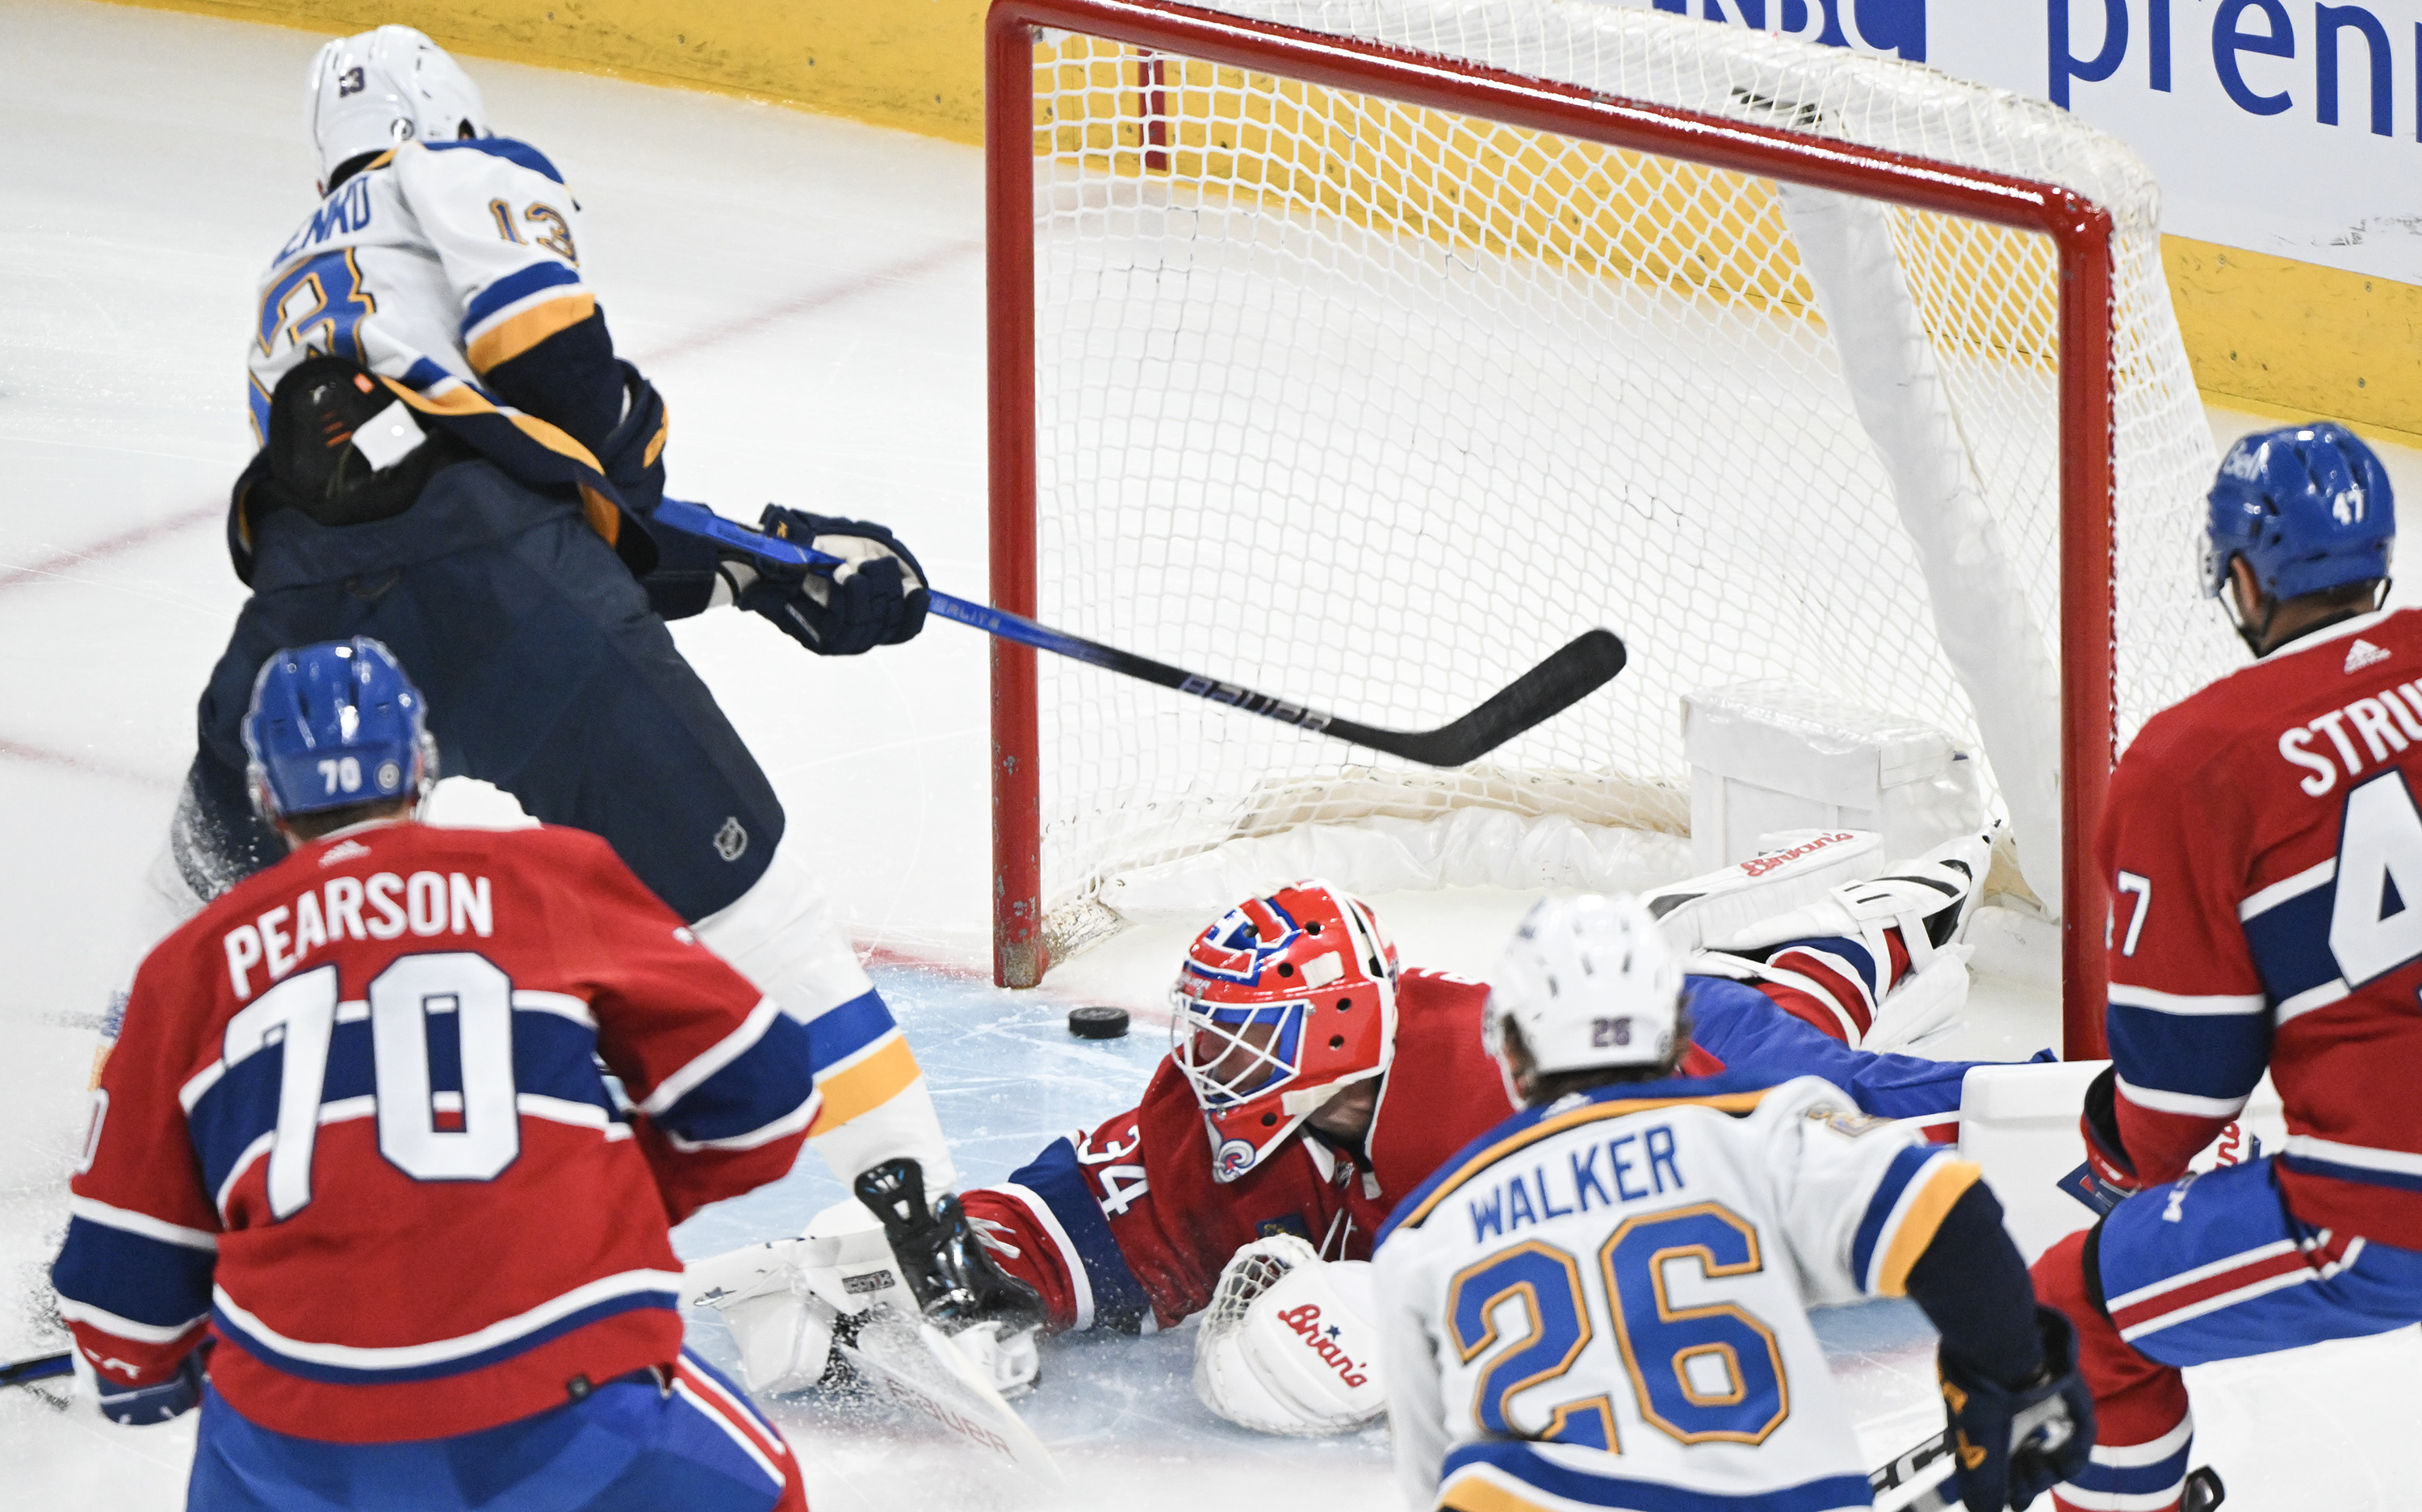 Call of the Wilde: Montreal Canadiens humbled by the St. Louis Blues